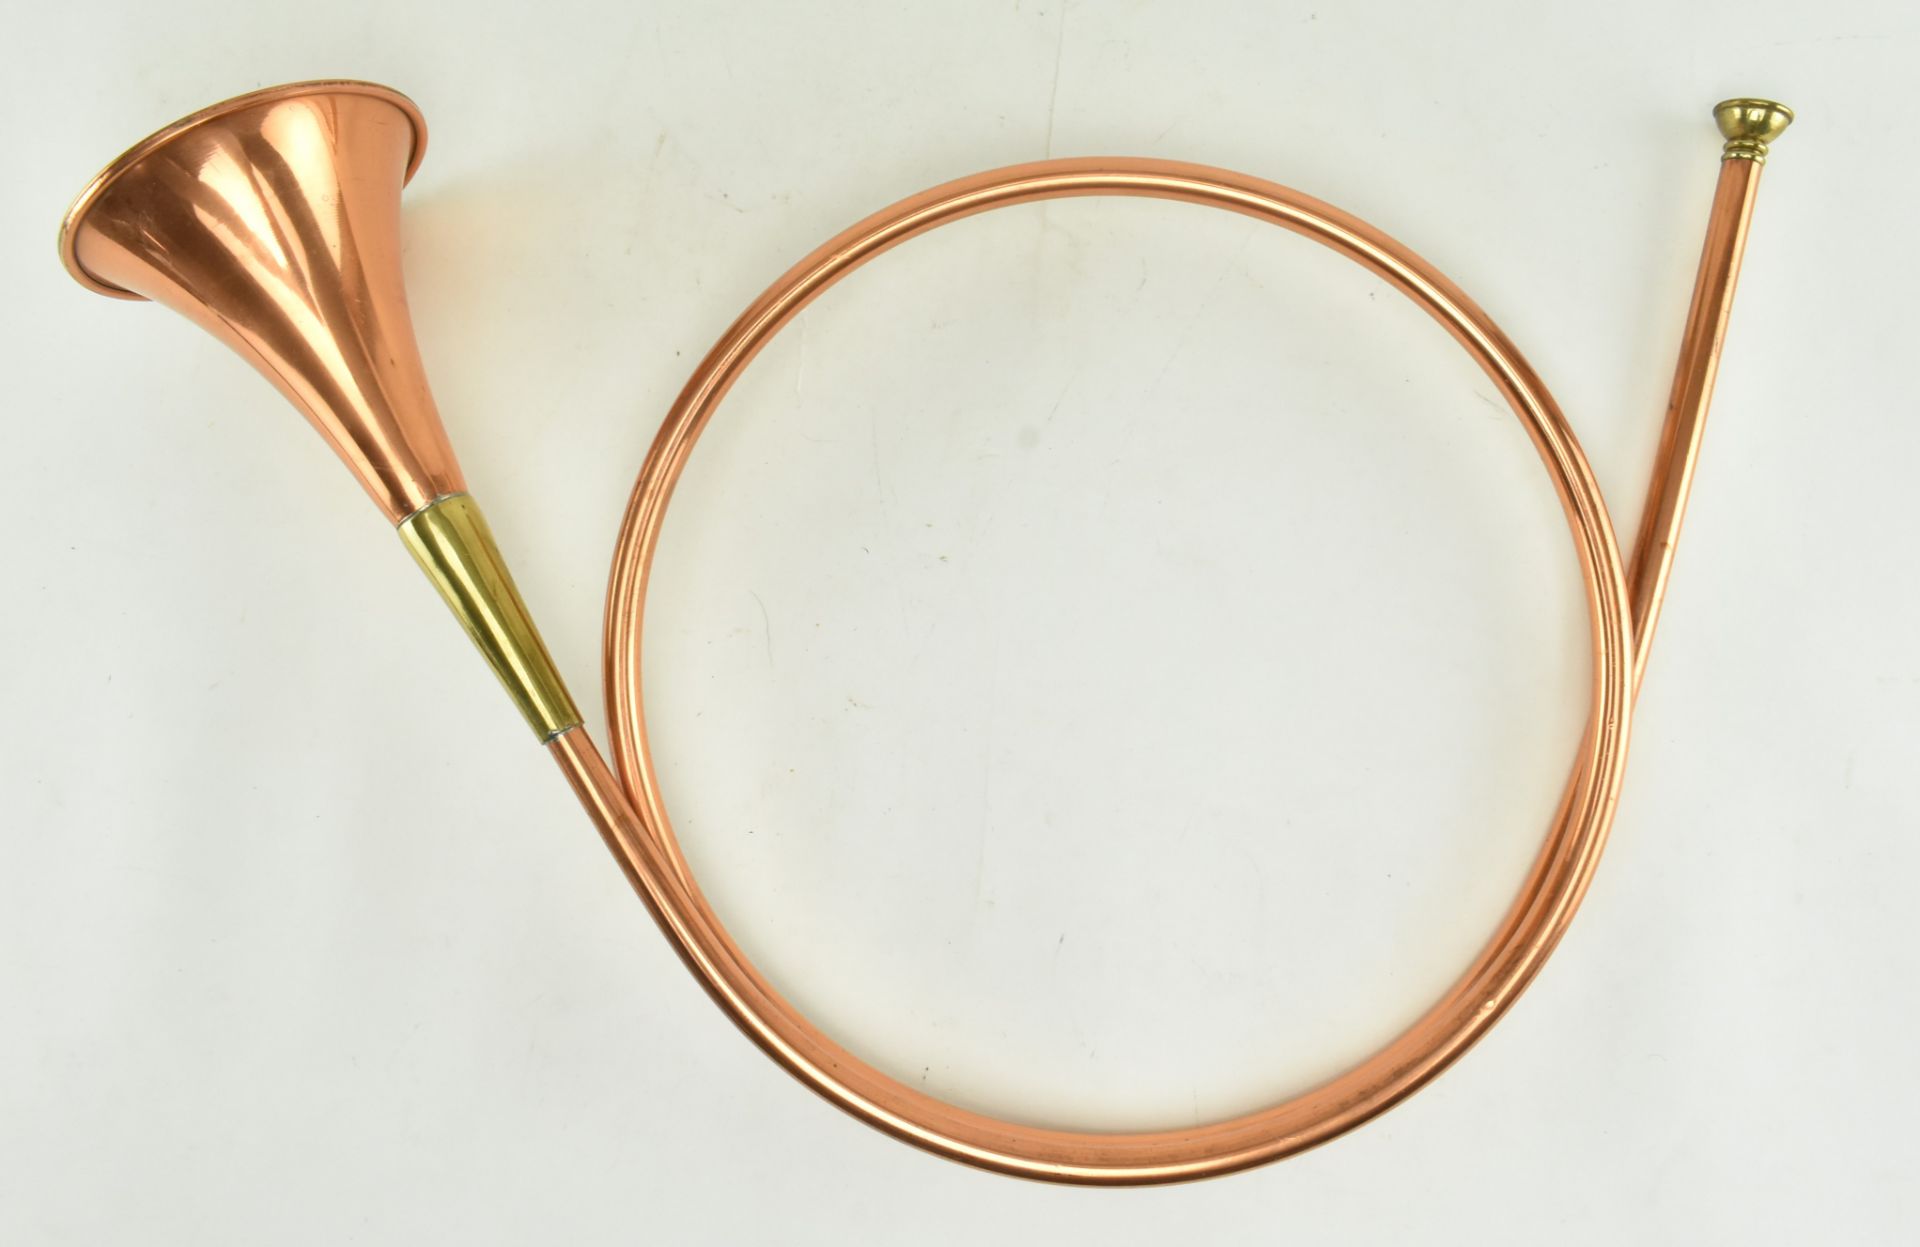 EARLY 20TH CENTURY COPPER & BRASS HUNTING HORN - Image 6 of 6